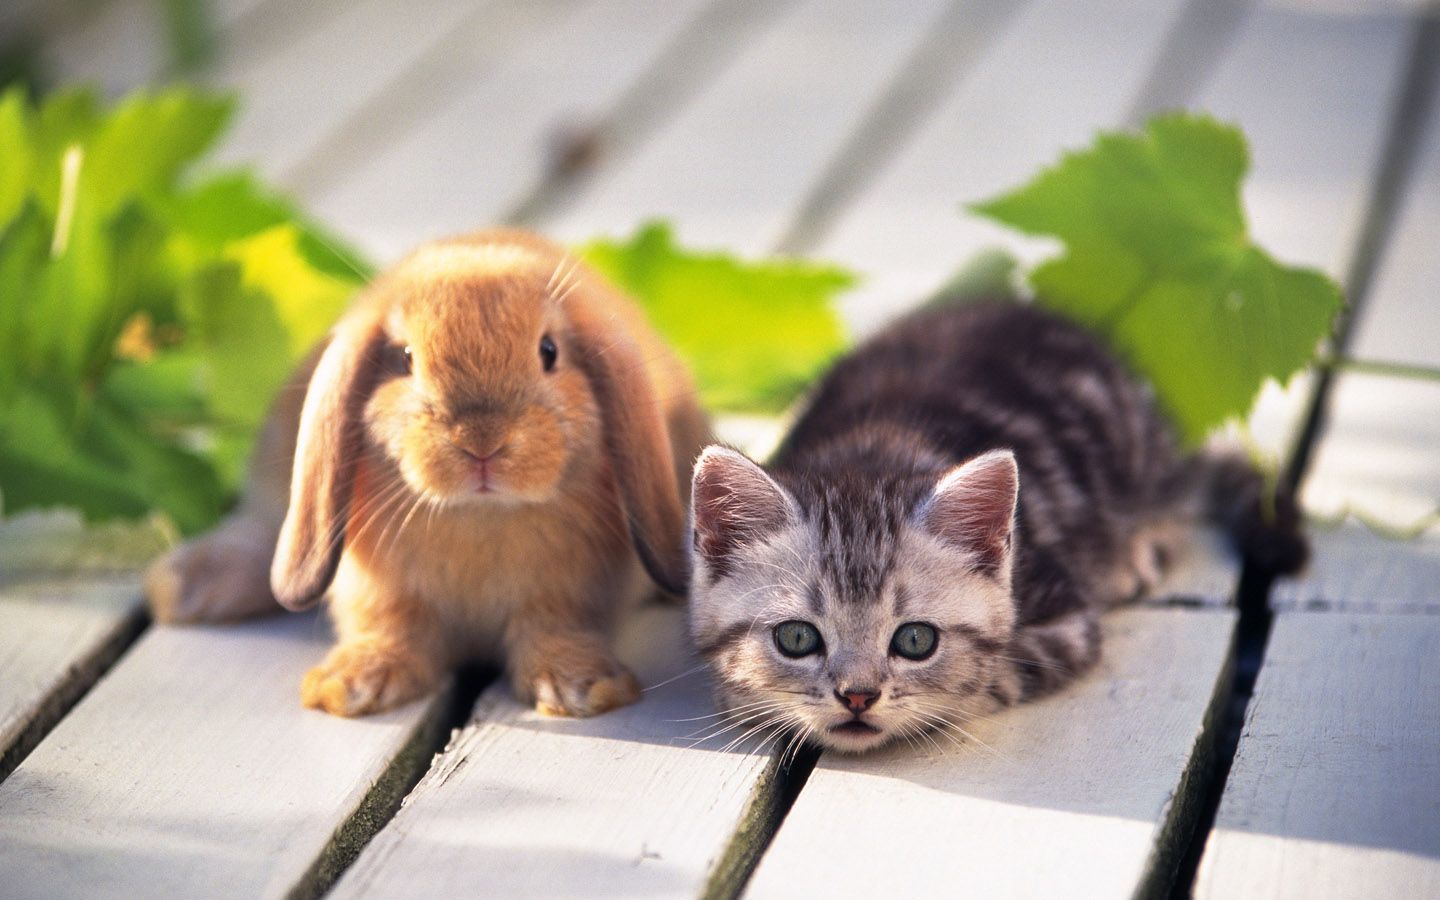 rabbit and cat sweet hd wallappers for desktop